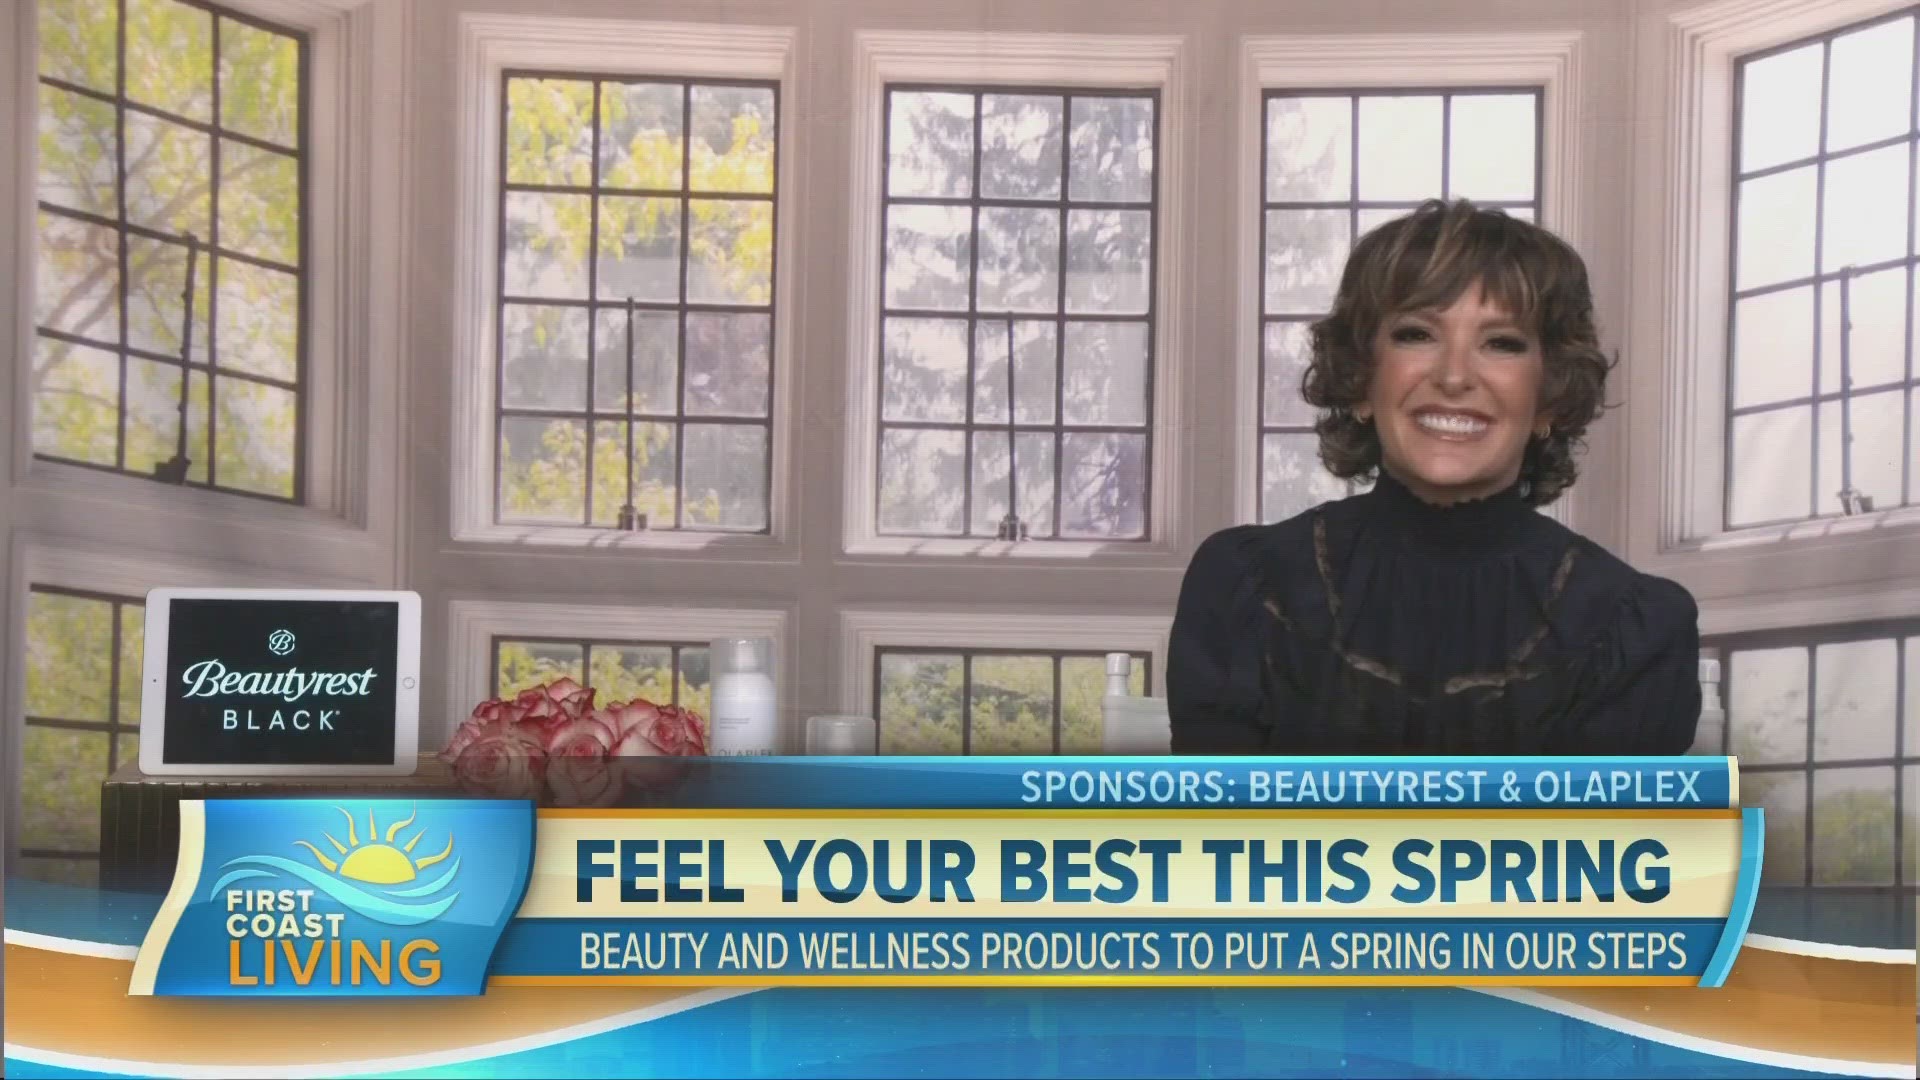 Lifestyle Editor, Joann Butler shares her tips and must-haves to feel your best this spring.